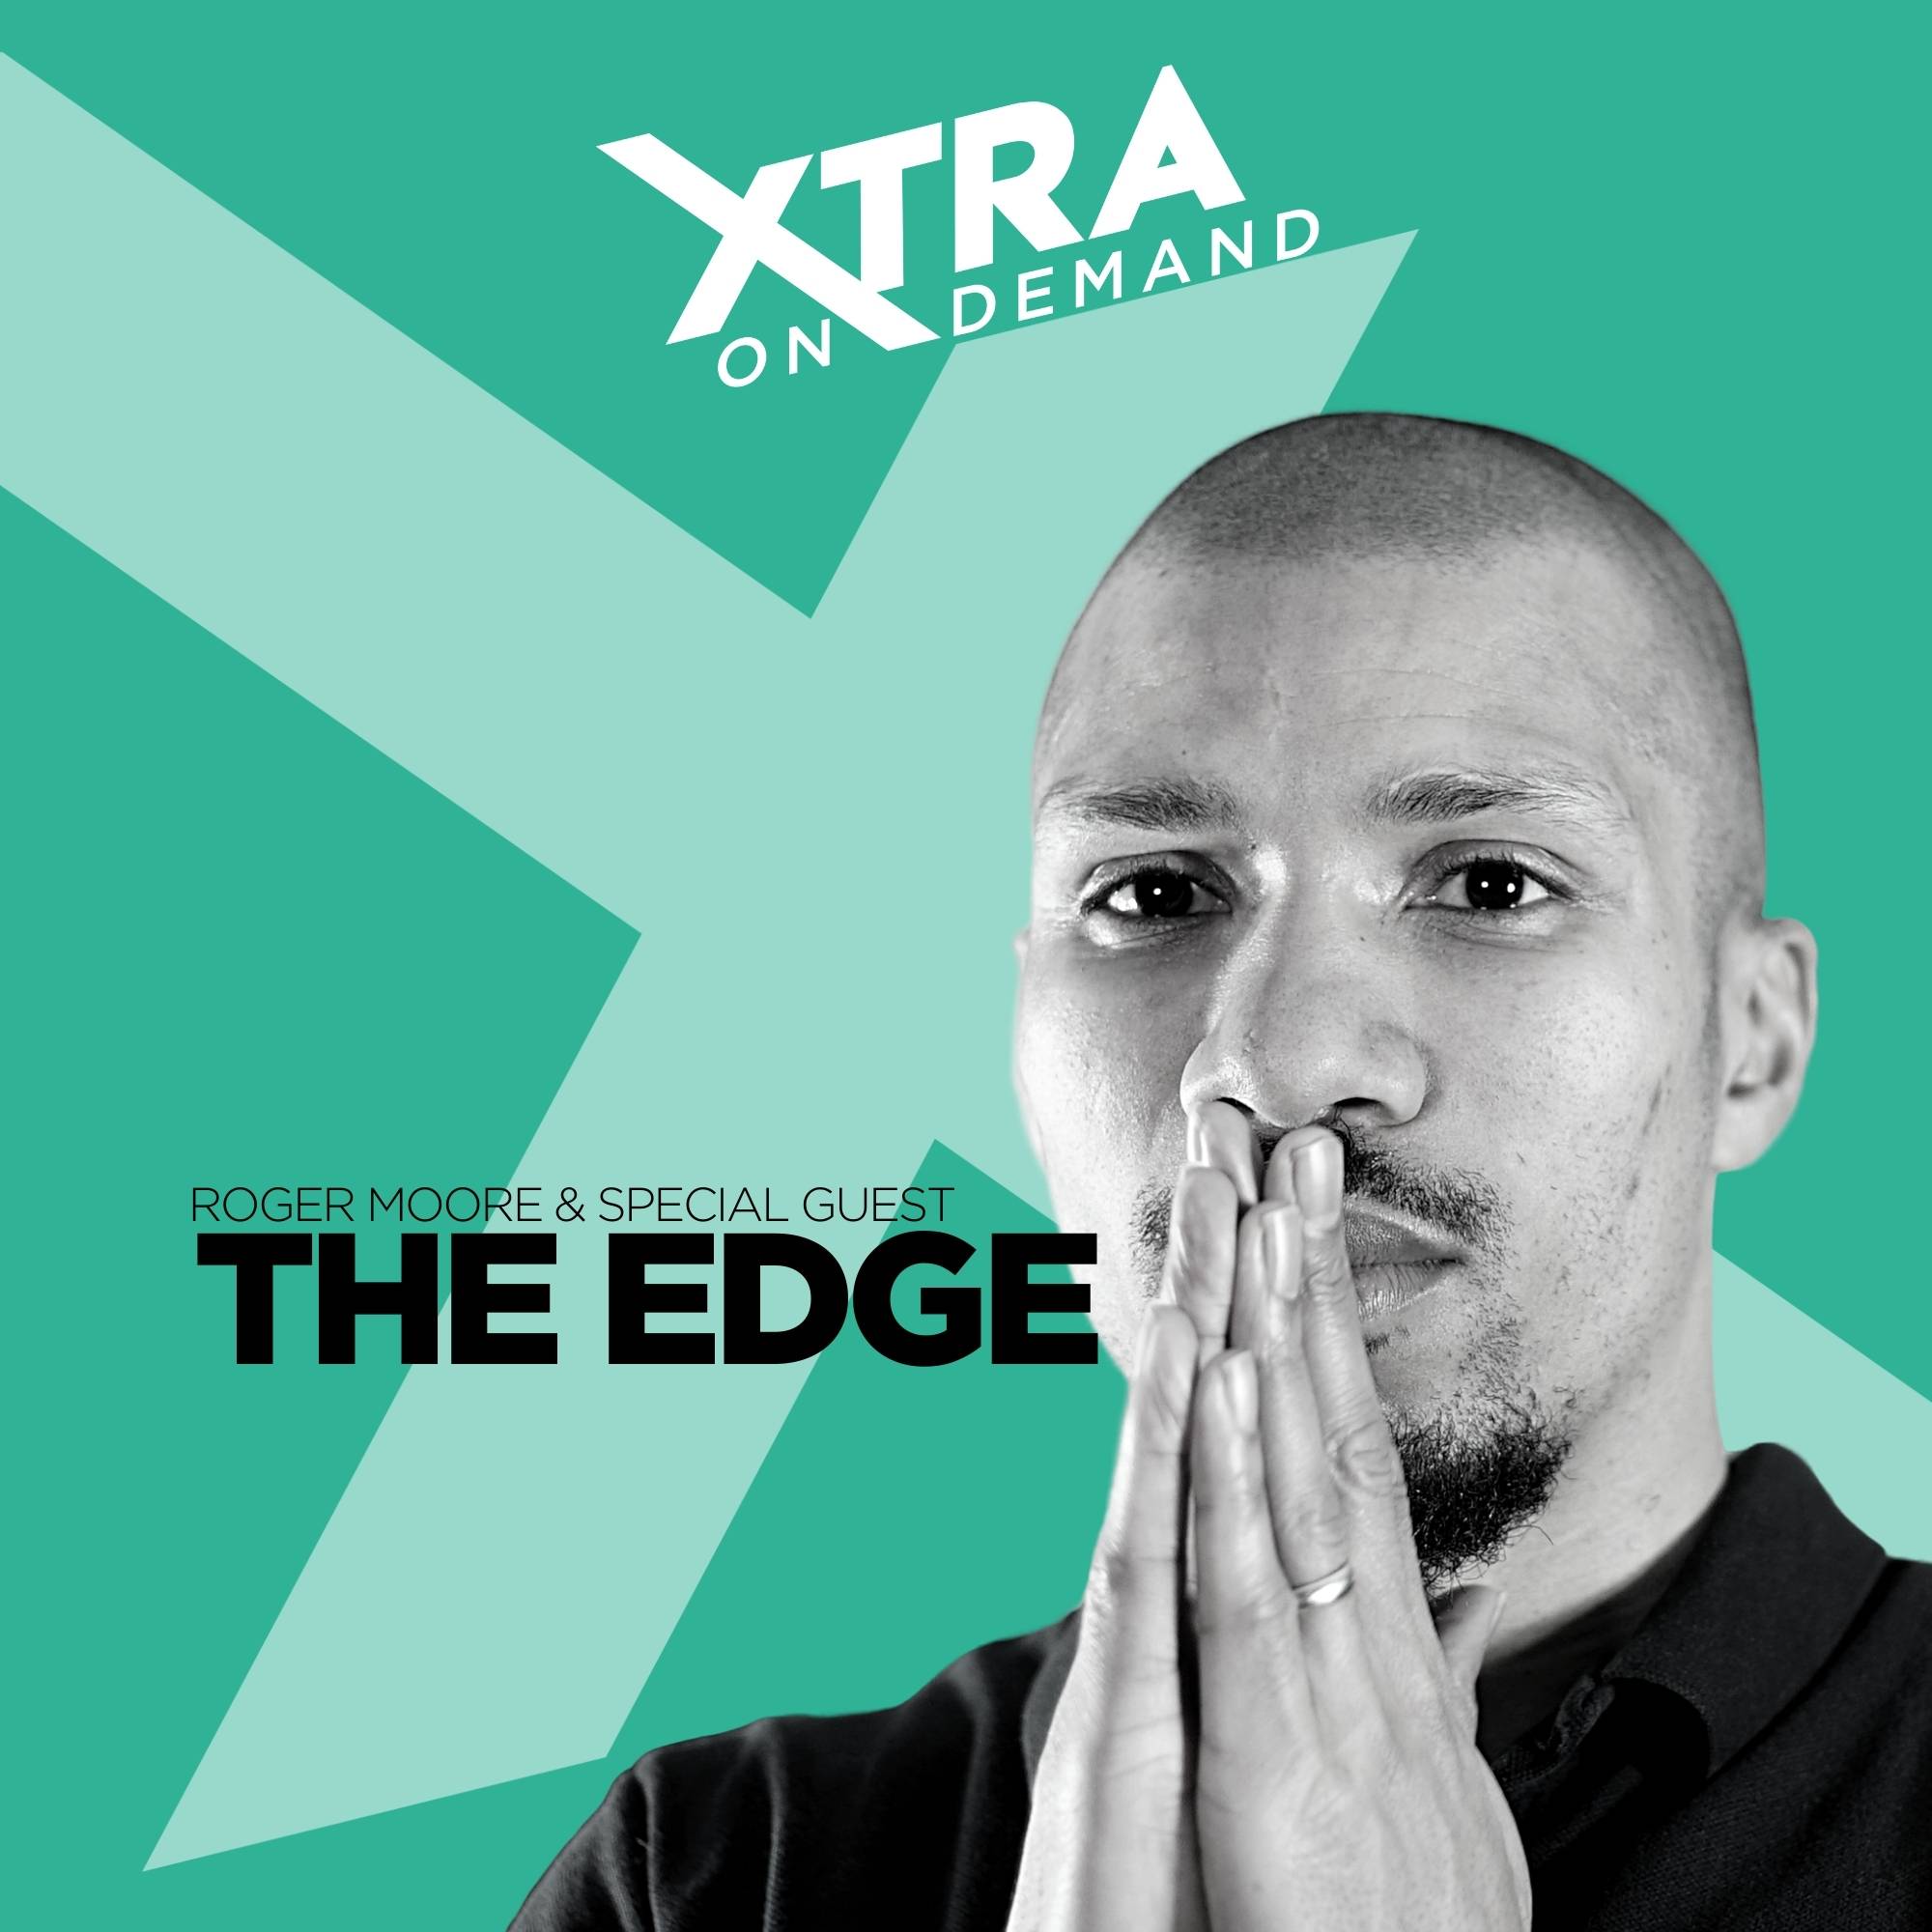 The Edge - Affinity Xtra Live Now